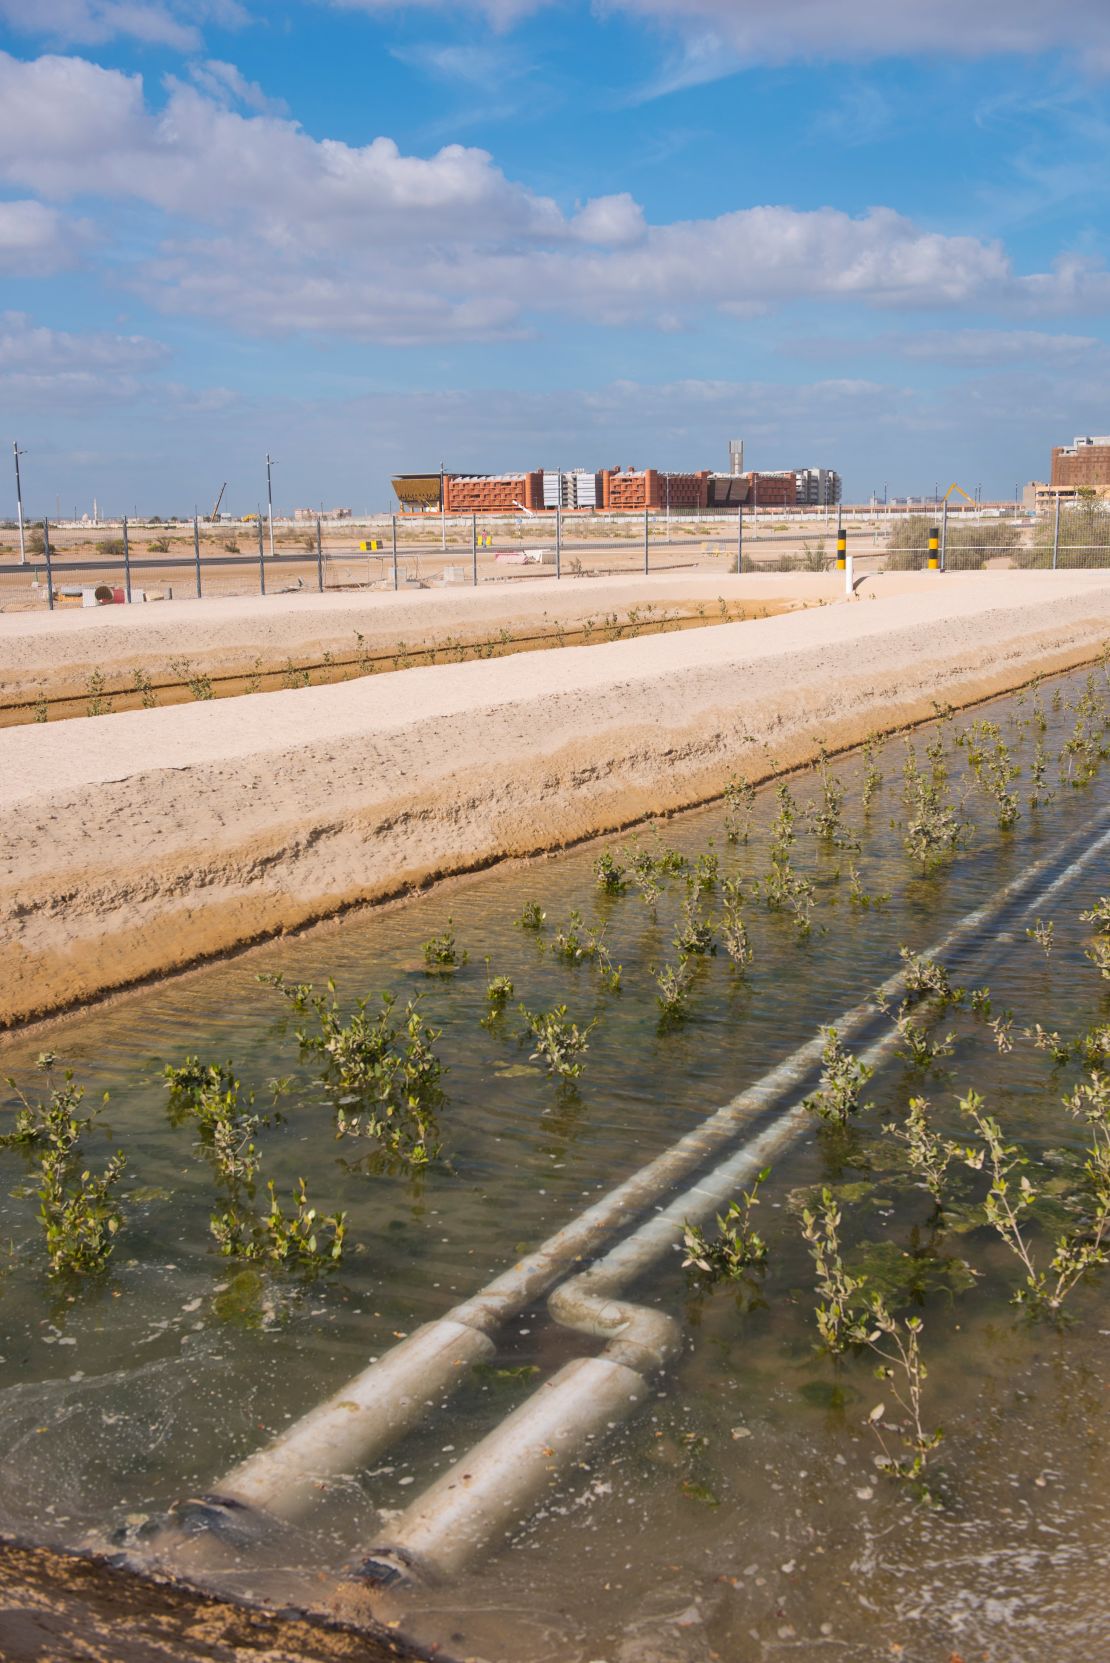 The Integrated Seawater Energy and Agriculture System project in Abu Dhabi, the UAE.